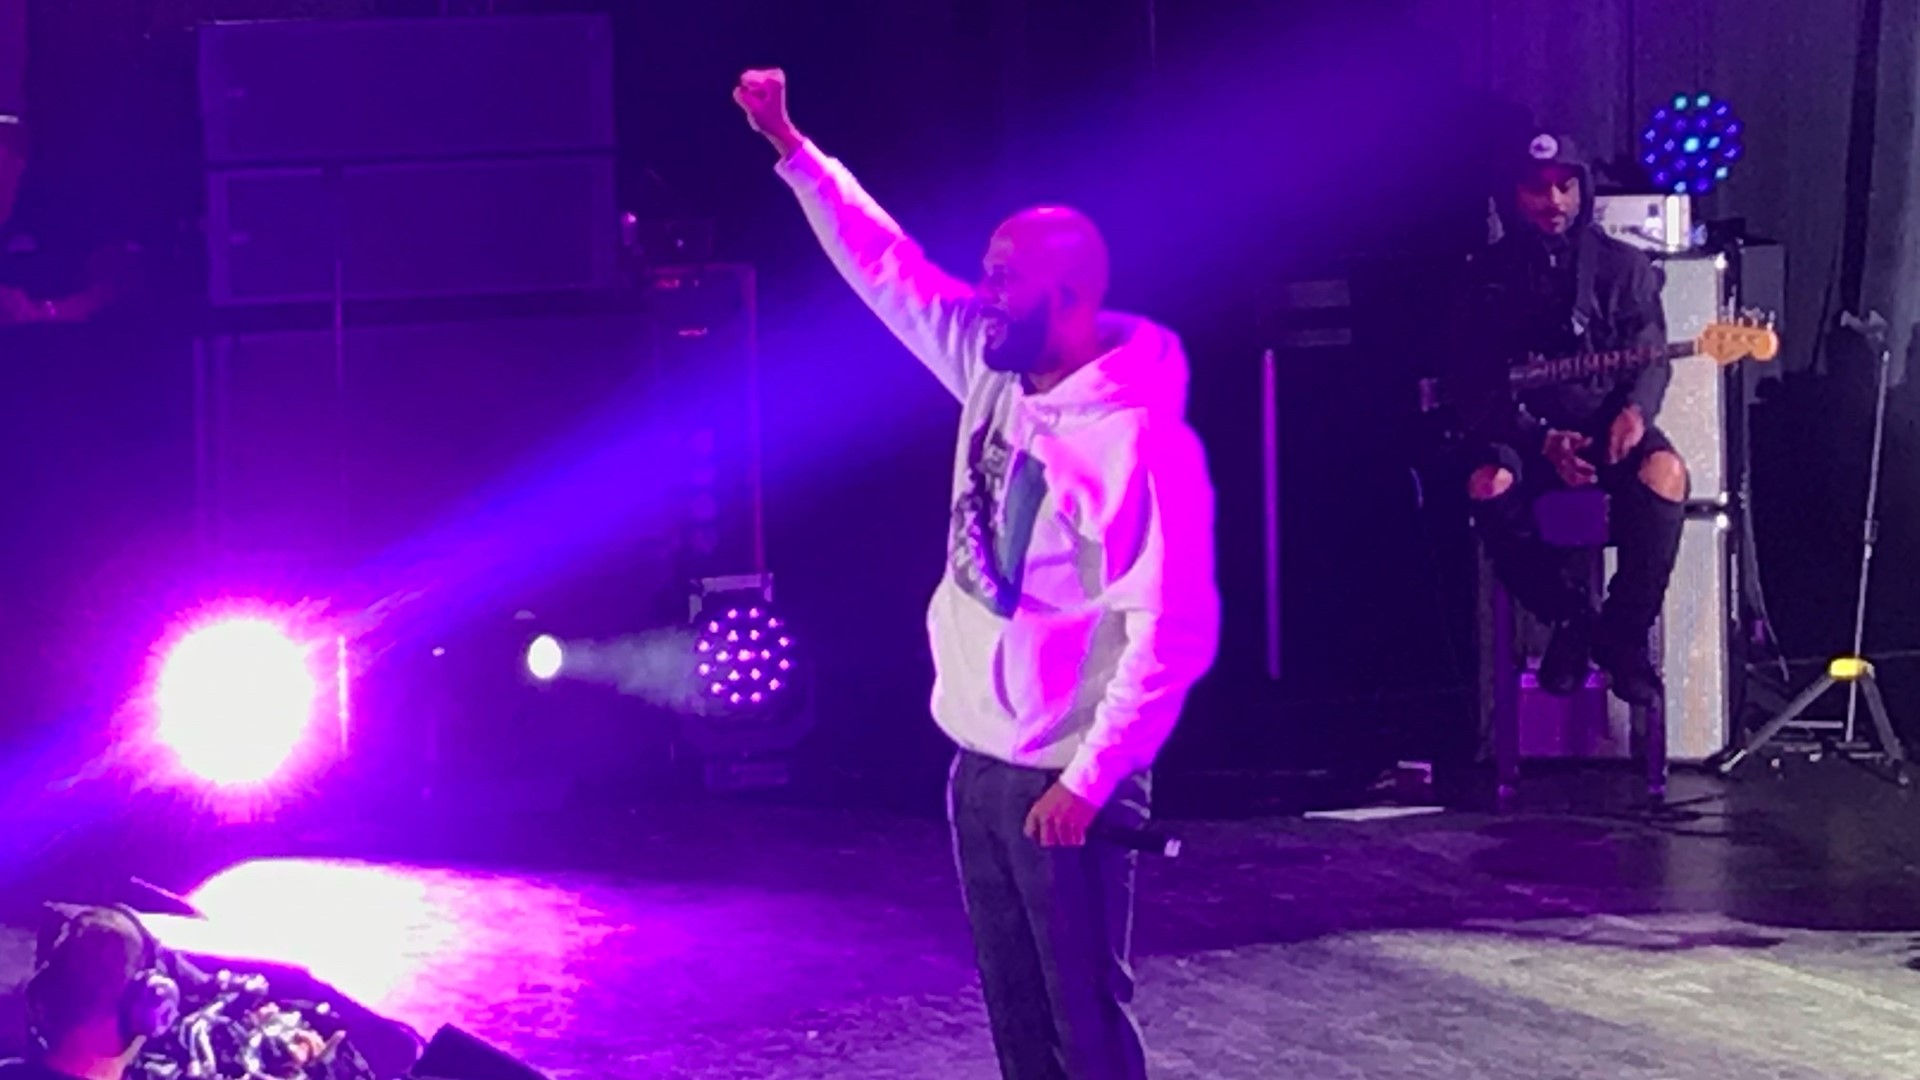 Artist and activist Common hosted a free community concert for the City of Stockton, Friday night. The message behind the concert is to "Imagine Justice."